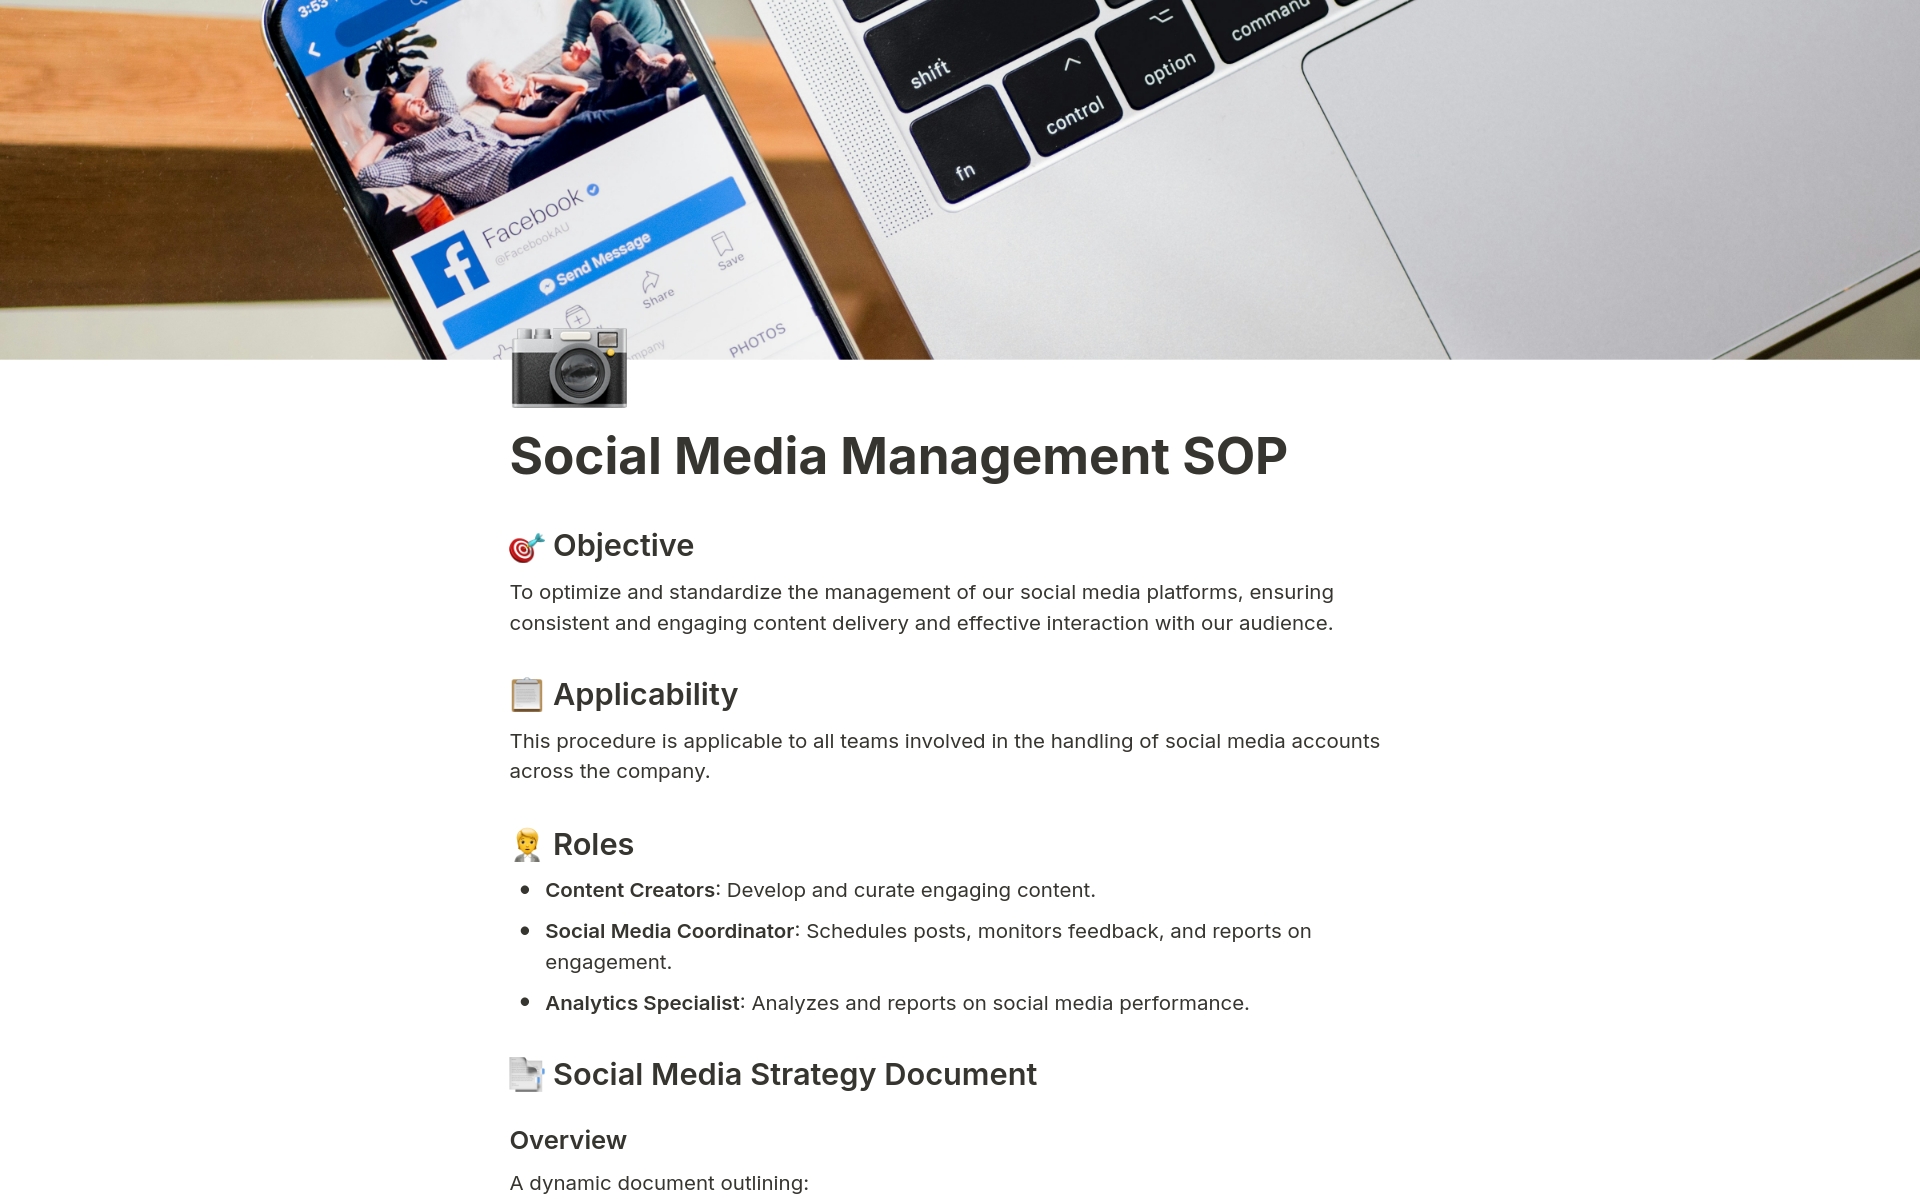 Streamline your social media operations with this SOP template, enhancing content delivery and audience interaction across all platforms.